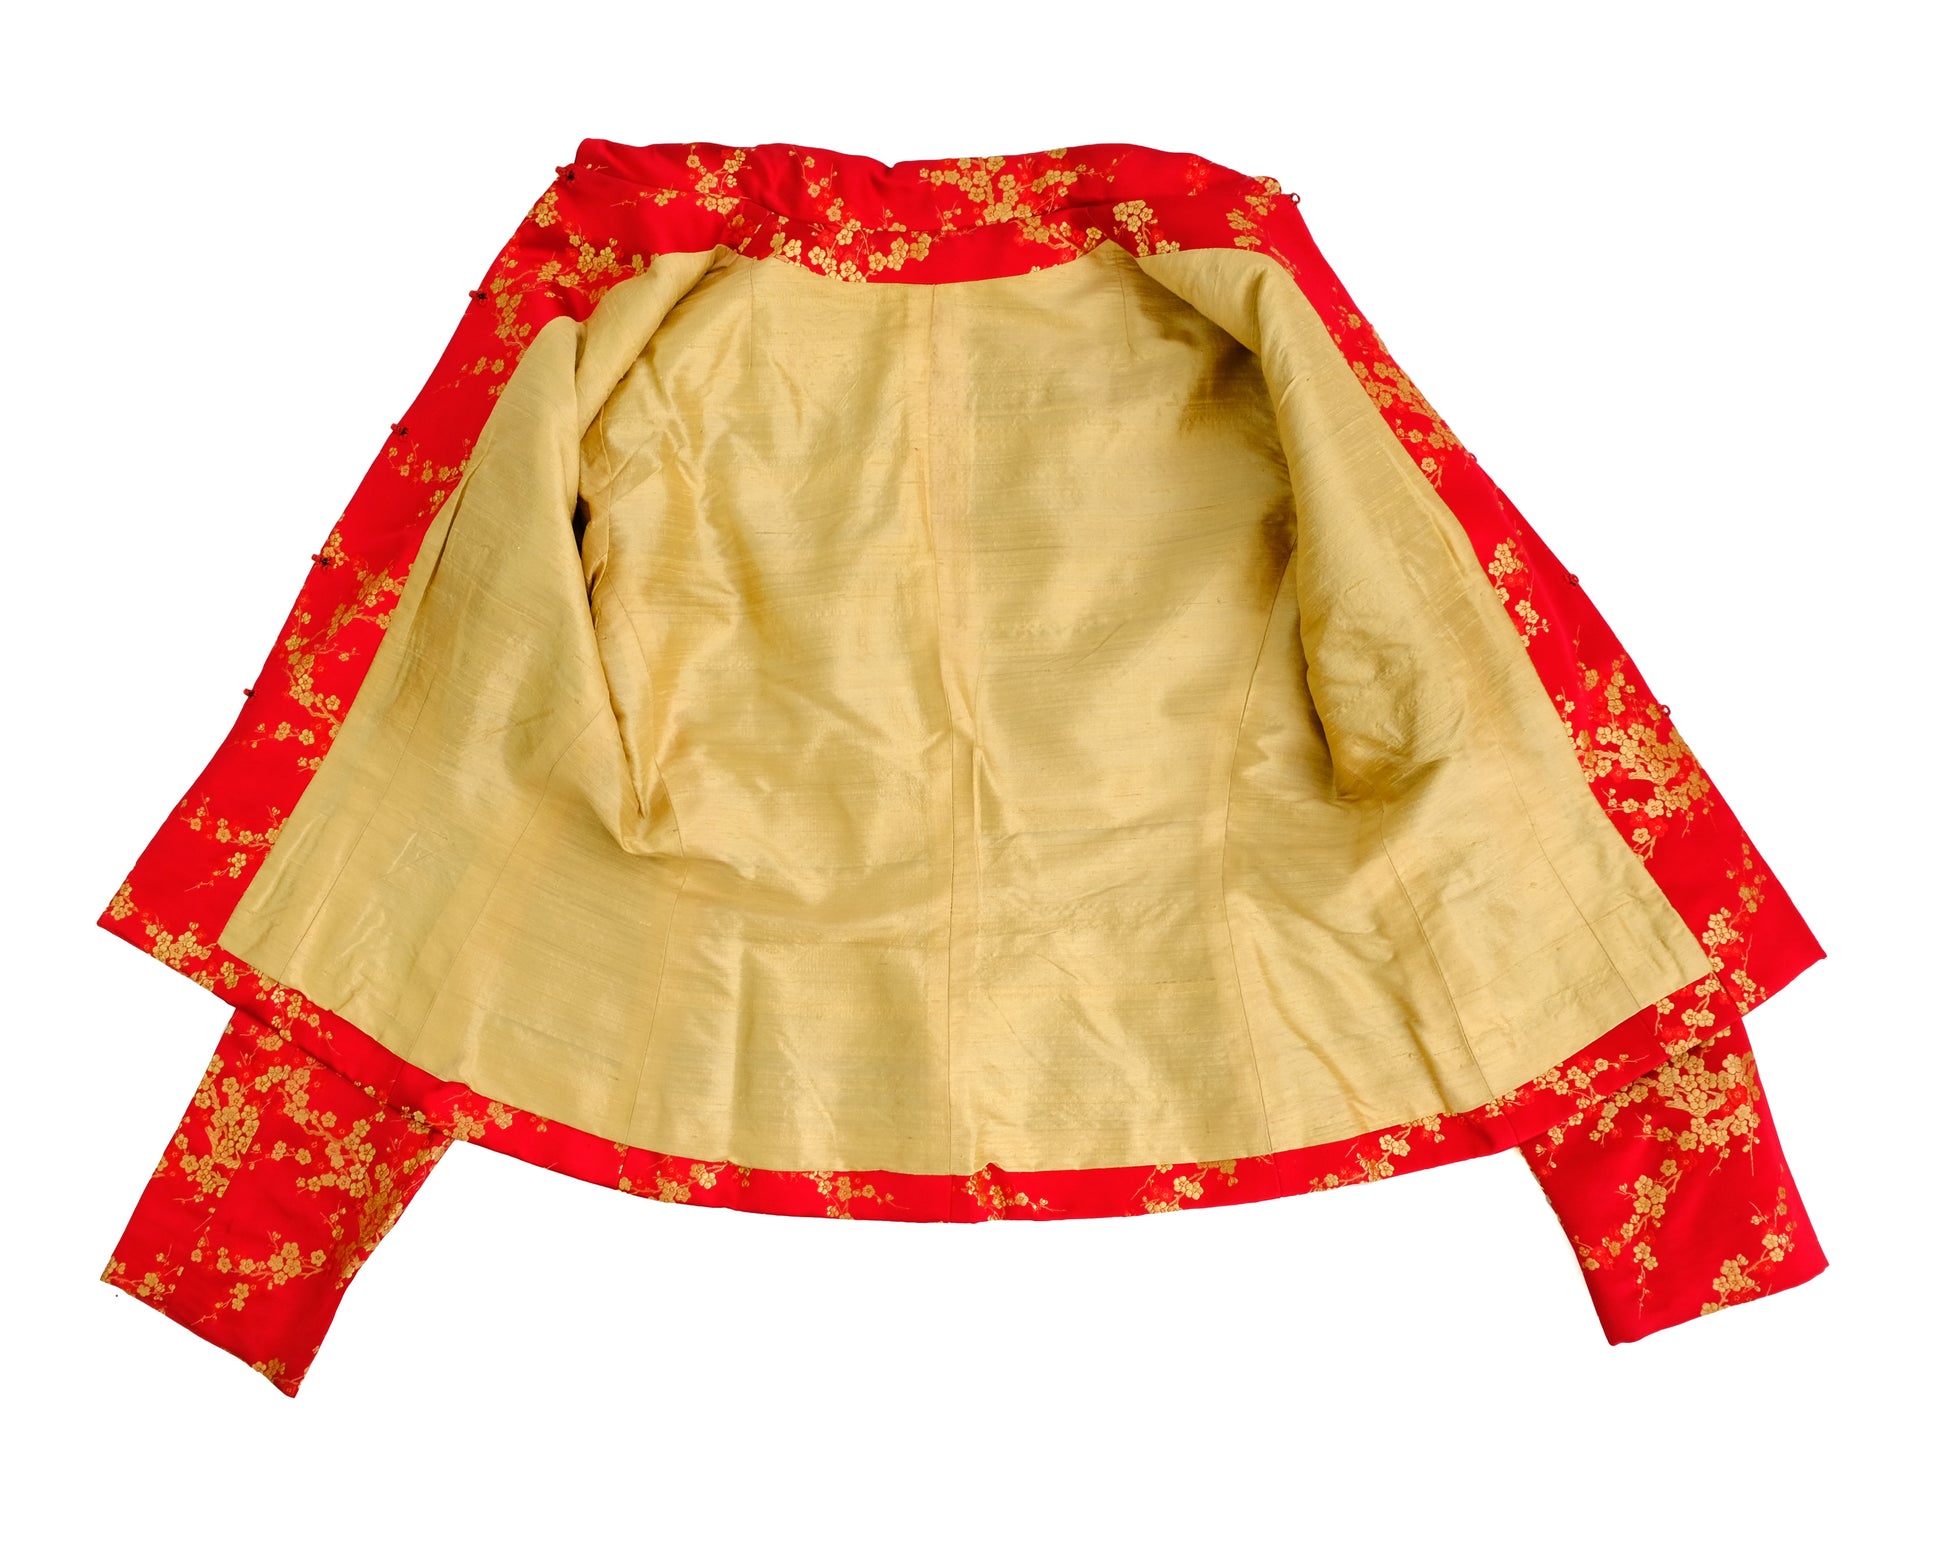 Handmade Vintage Skirt Suit in Red and Gold Chinese Silk, UK10